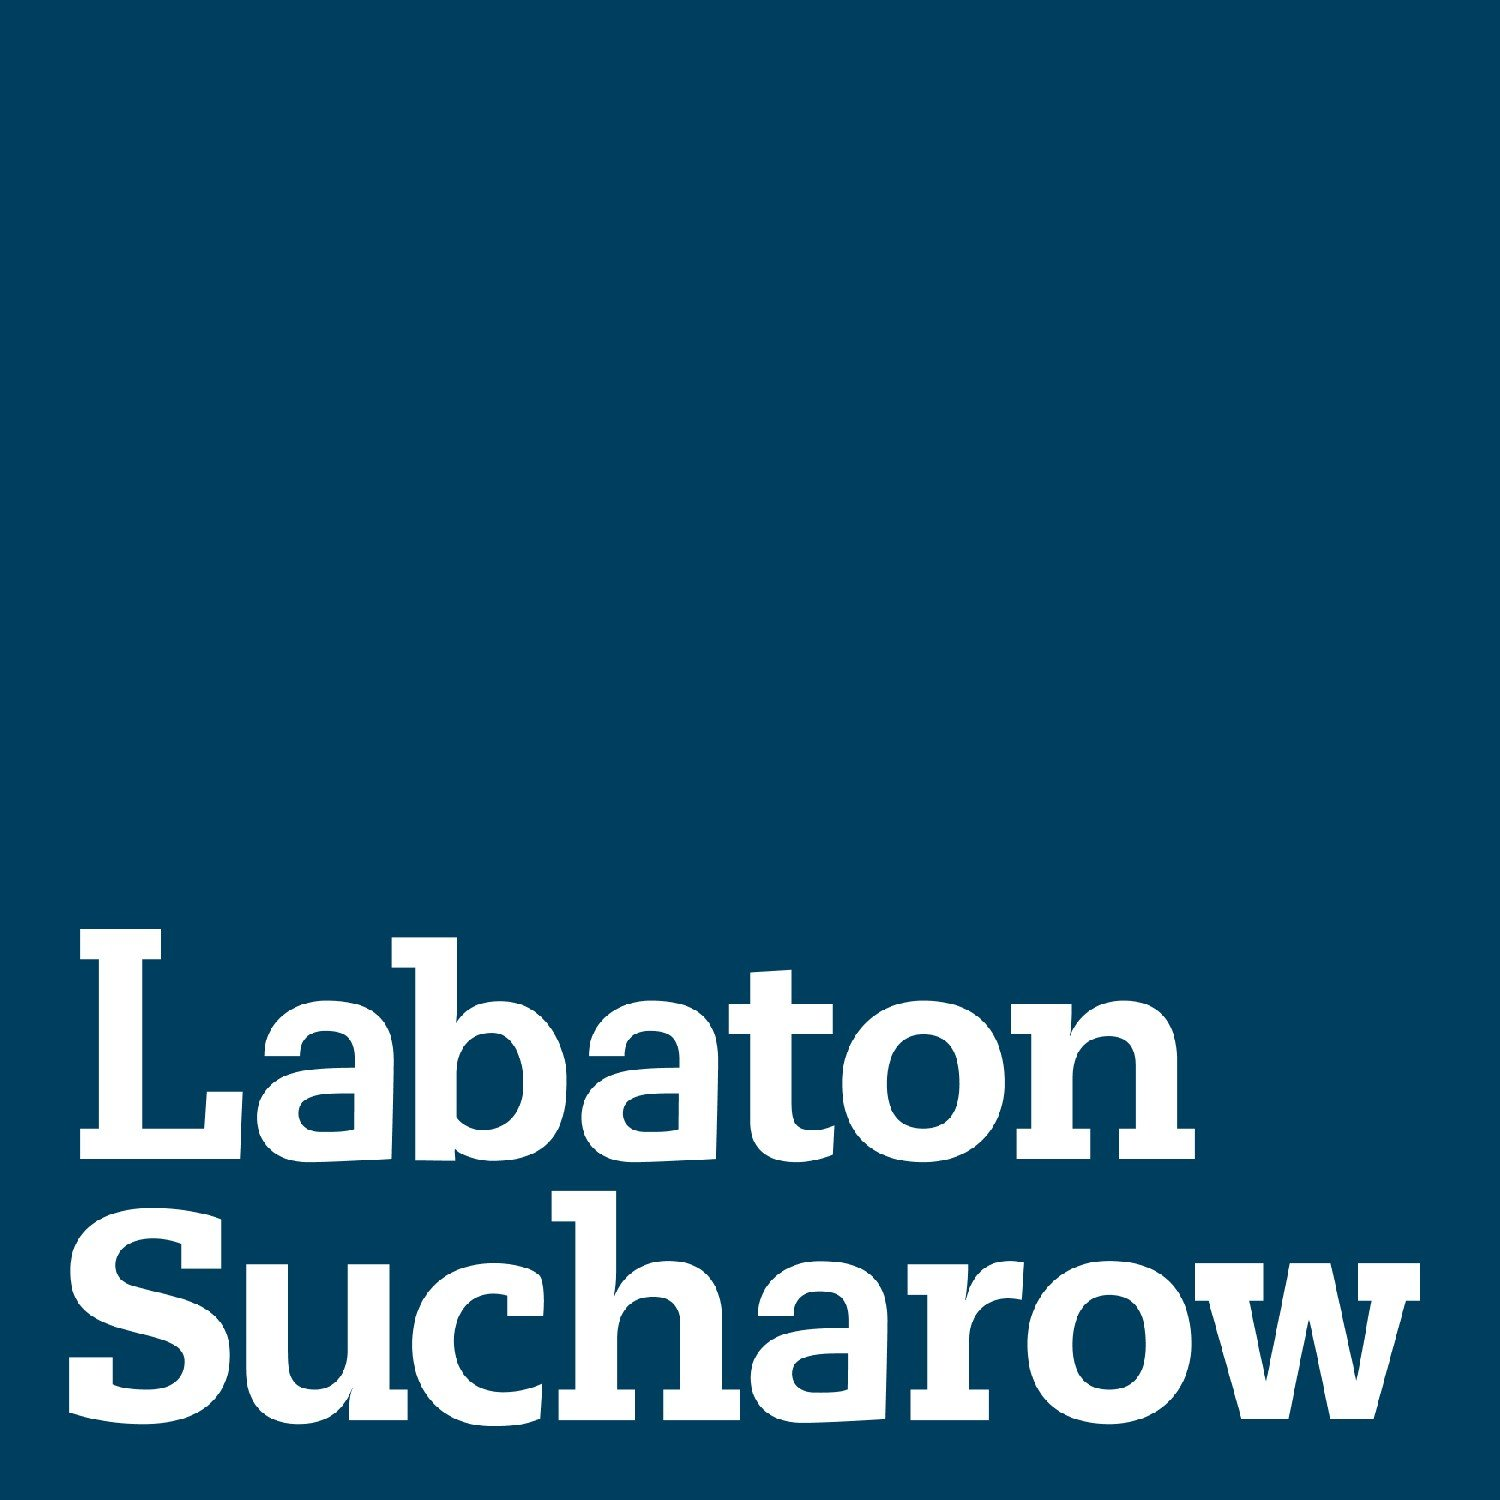 Labaton Sucharow LLP, Thursday, February 4, 2021, Press release picture